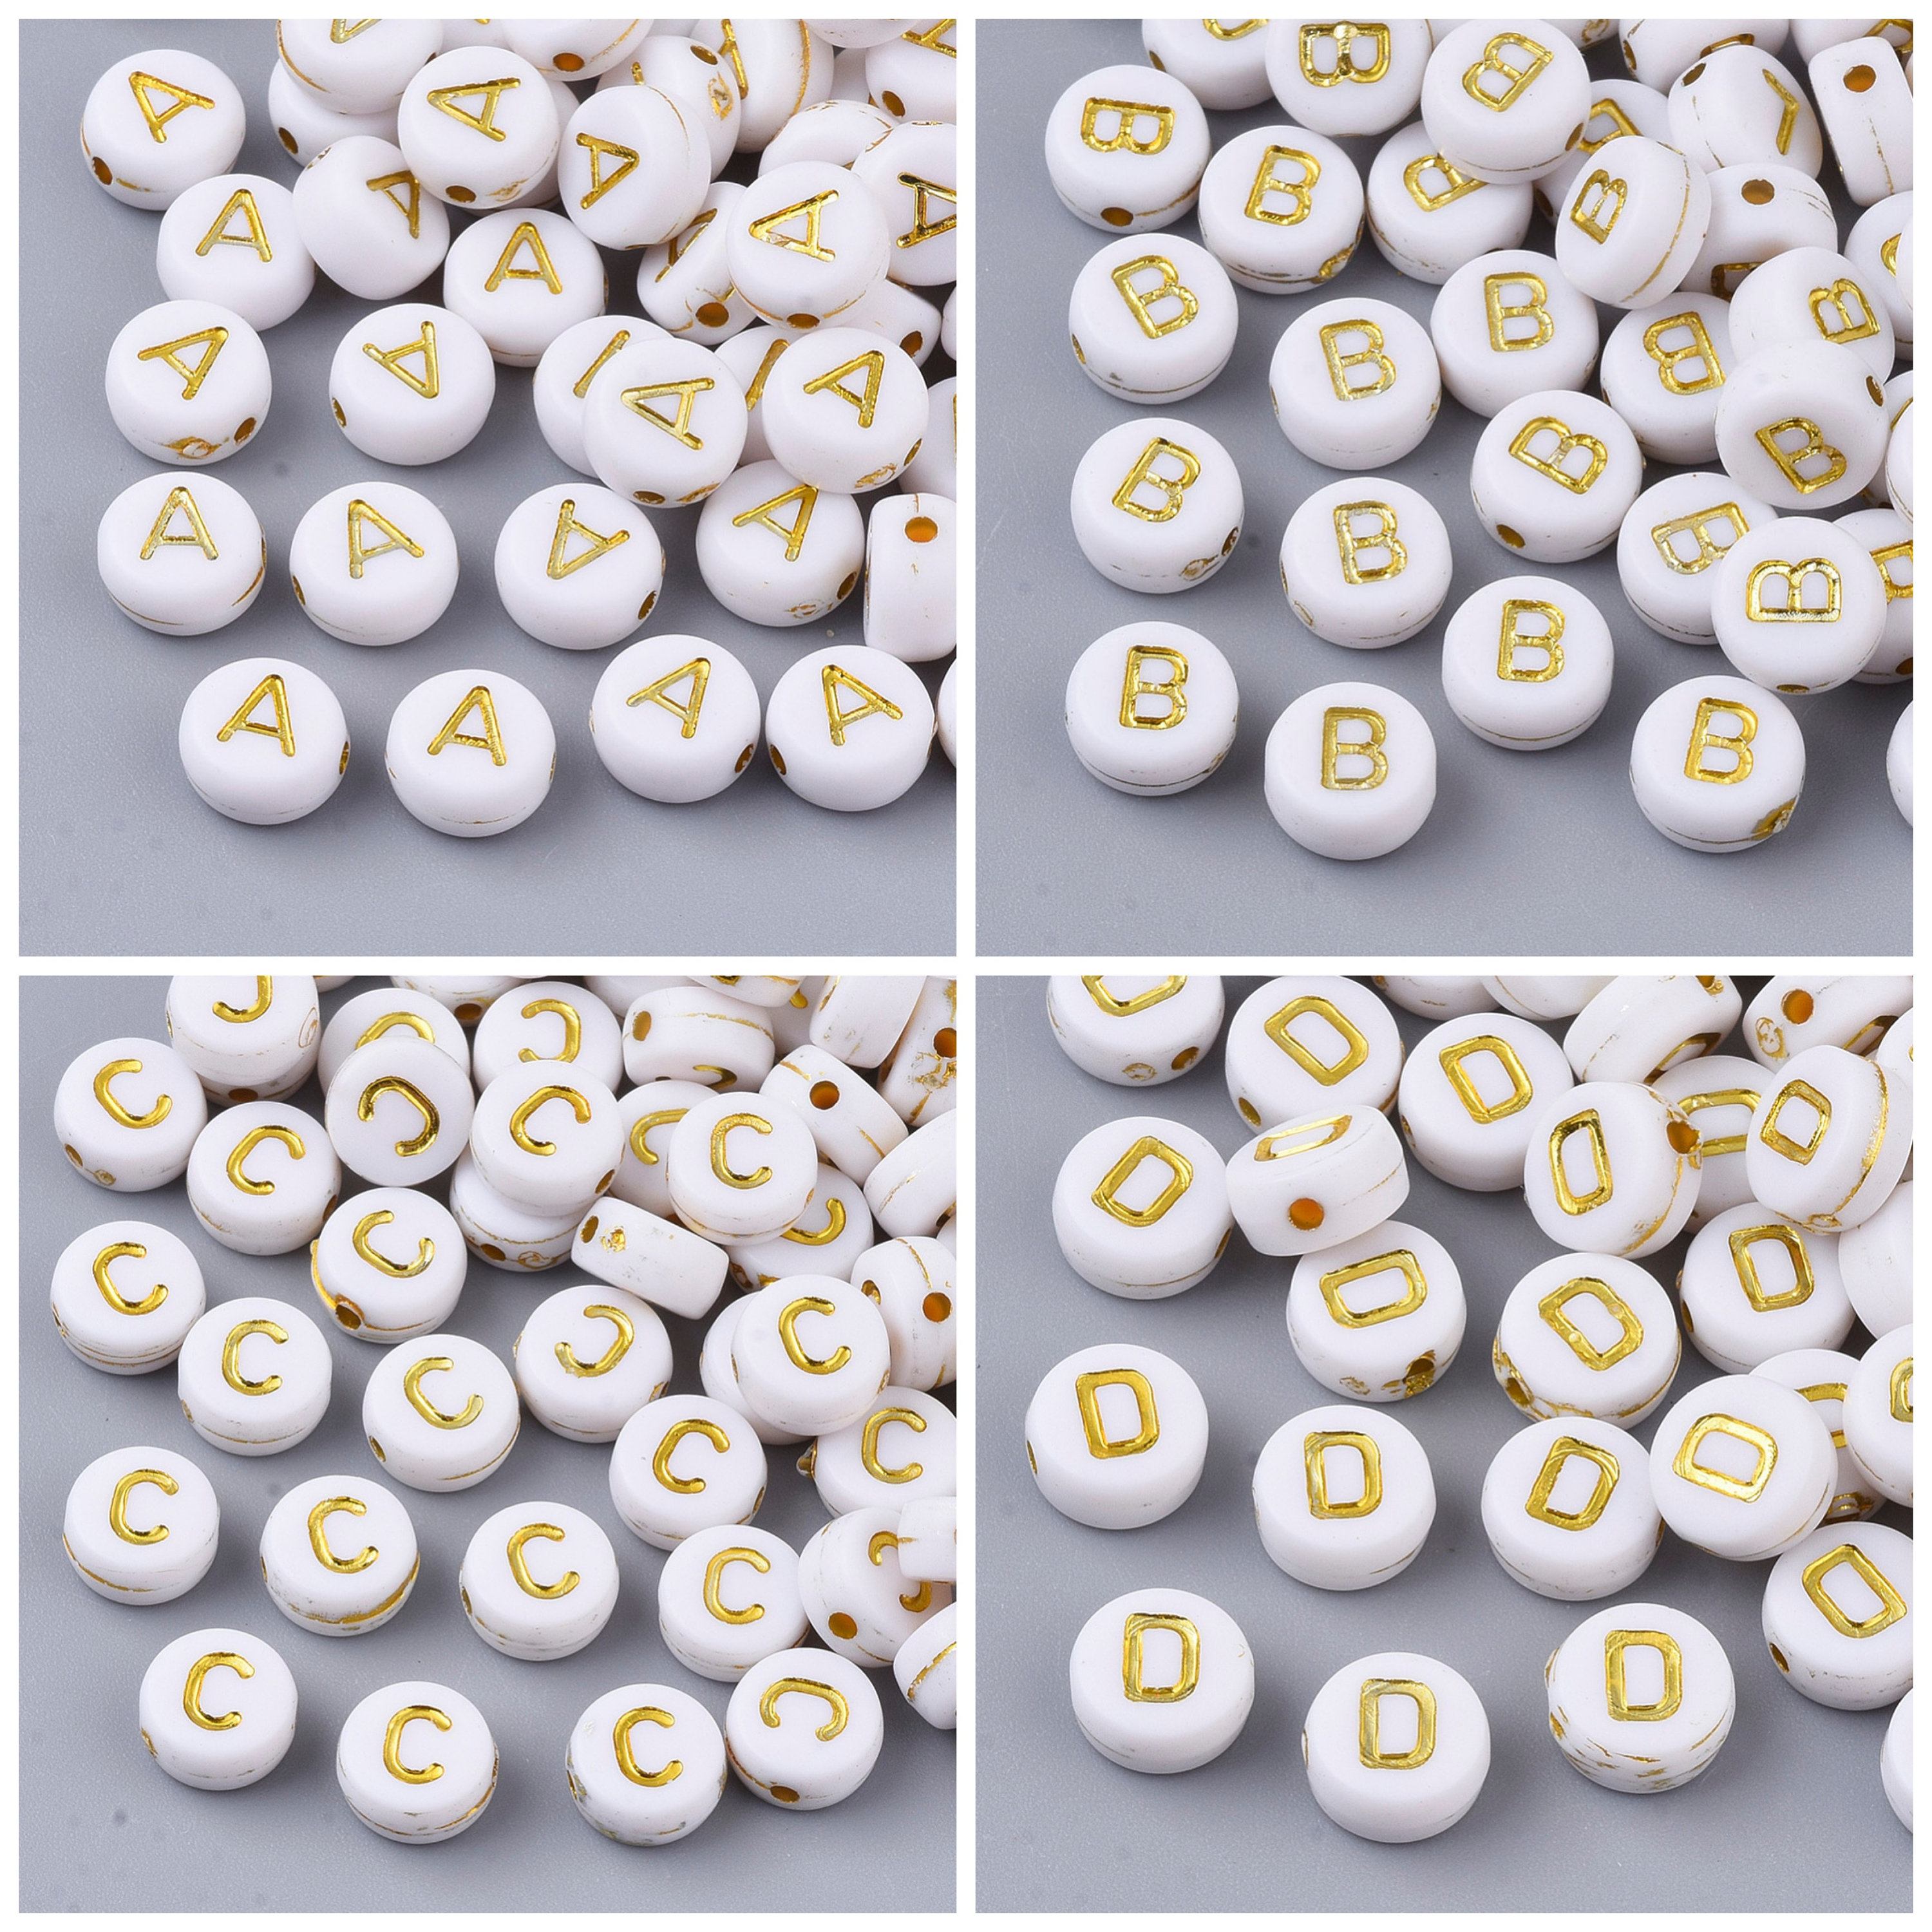 Black and Gold Letter Beads-1pc, Gold Letter Beads Bulk, Gold Letter Beads  for Bracelets, Gold Letter Beads for Sale, Gold Letter Beads 